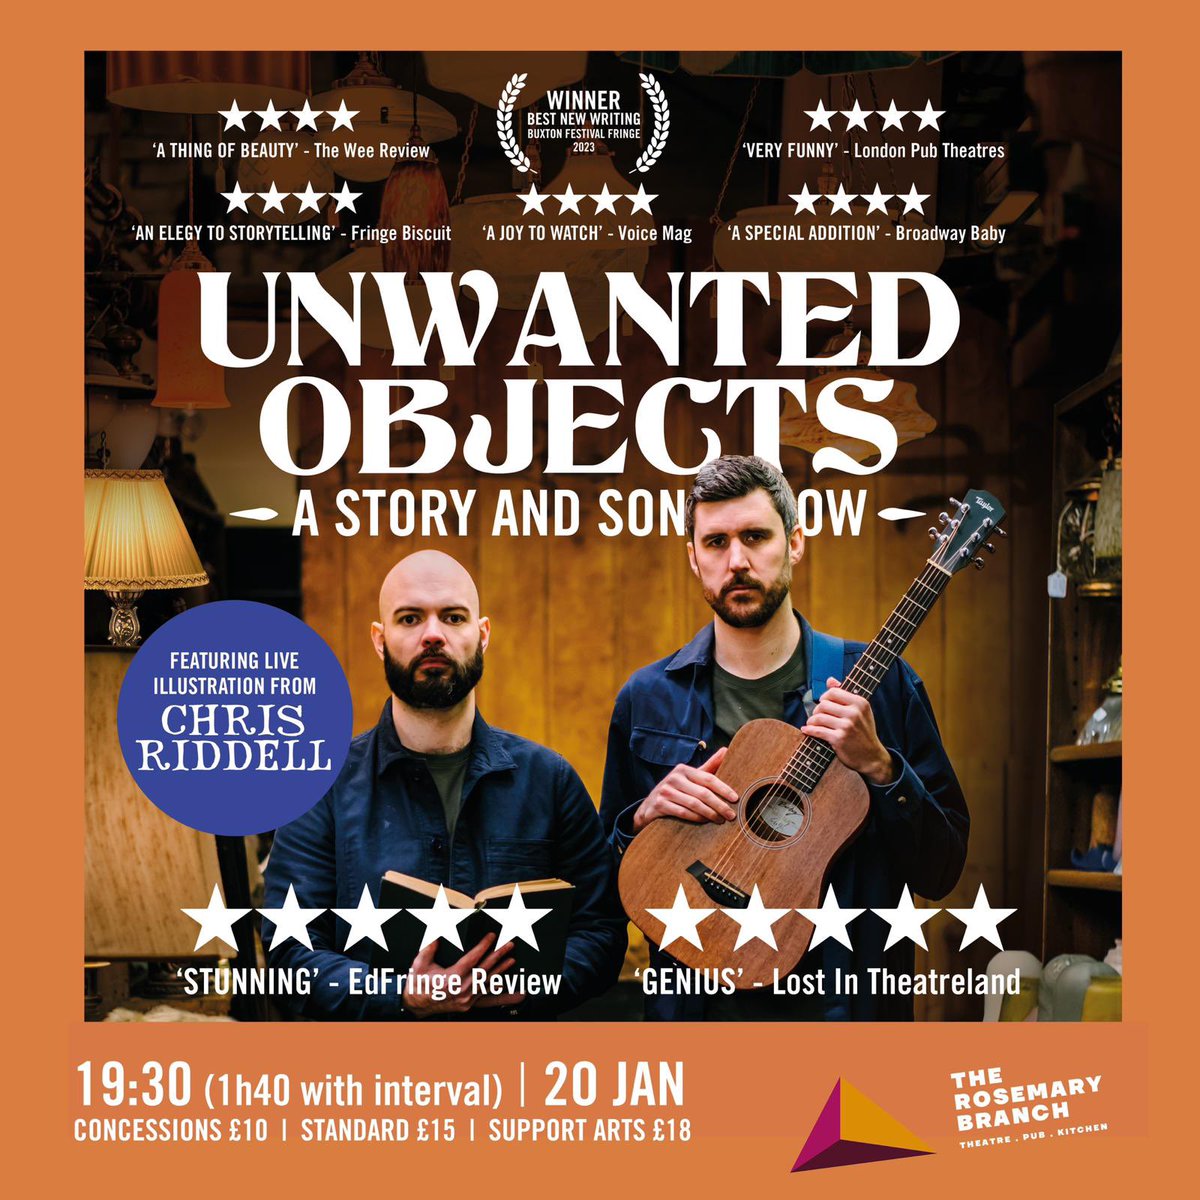 🧸🧡10 days til Unwanted Objects🧡🎶

Our tale of interwoven stories and songs lands at @RosieBTheatre for Gather Together Festival, live illustrated by @chrisriddell50! ✏️

📆20th January
🕰7.30 pm
🎟Link in bio
🧡Directed by @killeenmesoftly 

#londontheatre #fringetheatre